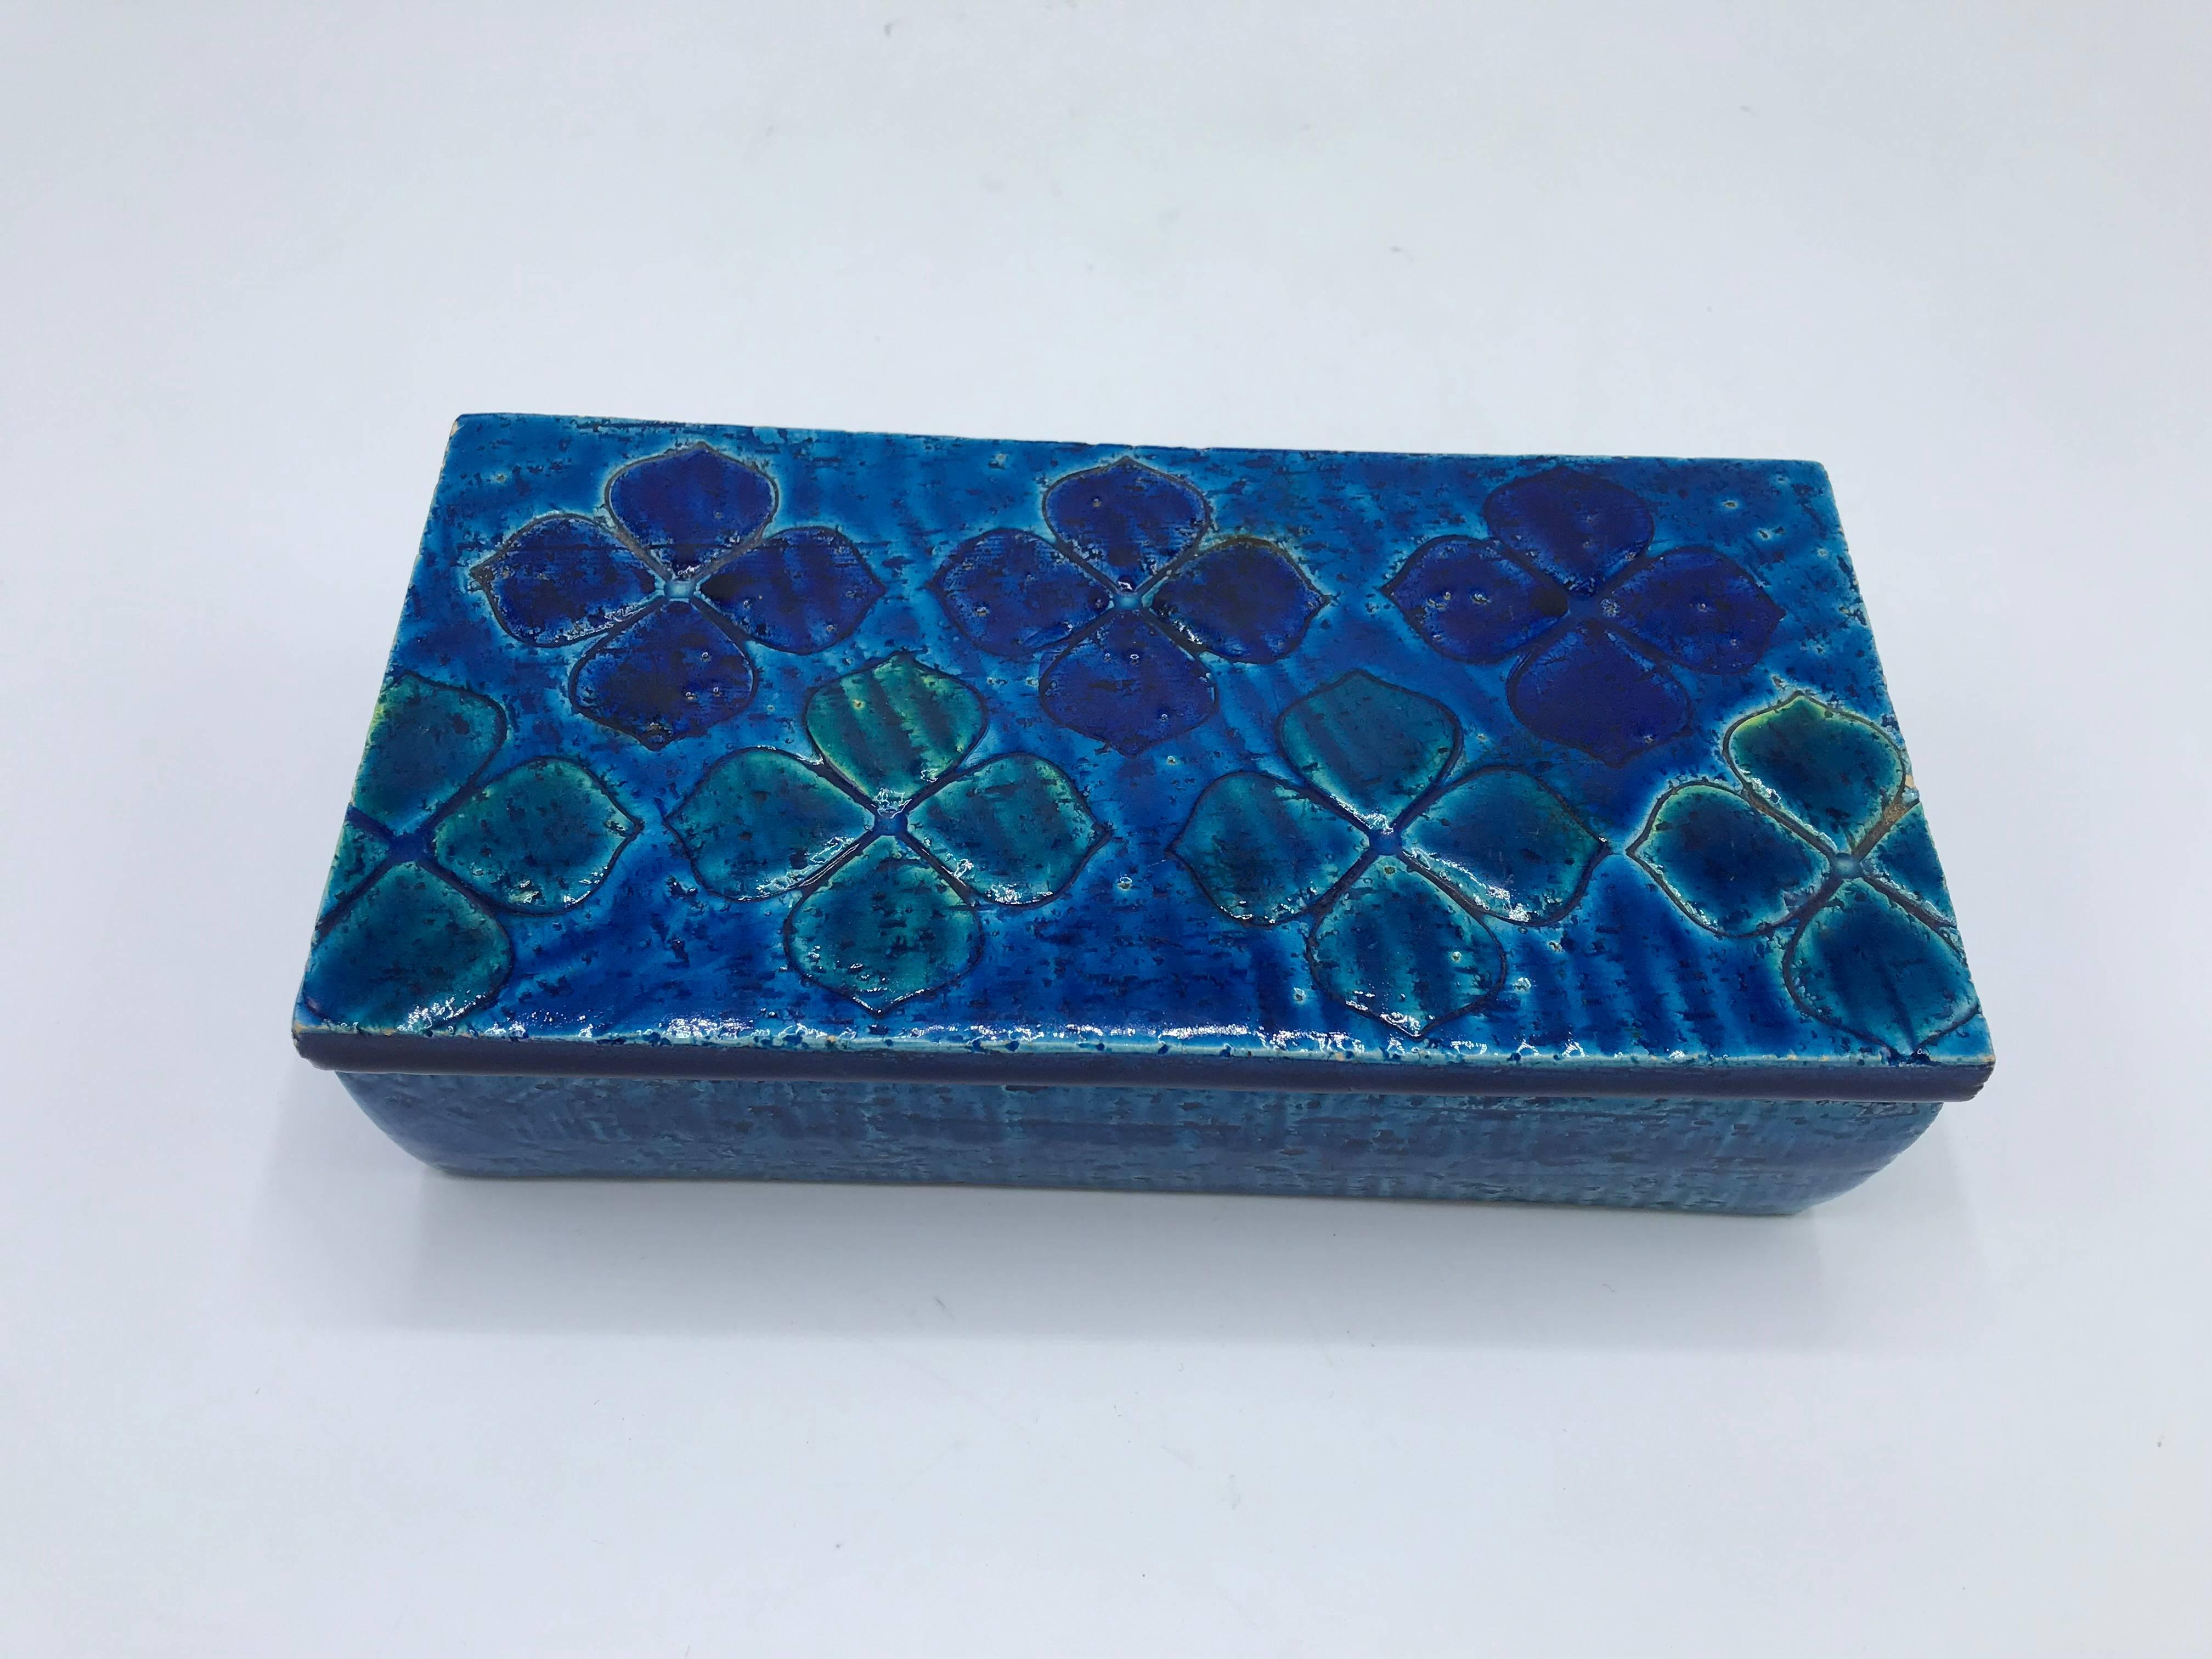 Offered is an absolutely stunning and extremely rare, 1960s Italian Aldo Londi for Bitossi clover blue lidded box. The piece has a beautiful, floral motif on the lid. There were only 20 of these created as samples for the Bitossi studio. The rarity